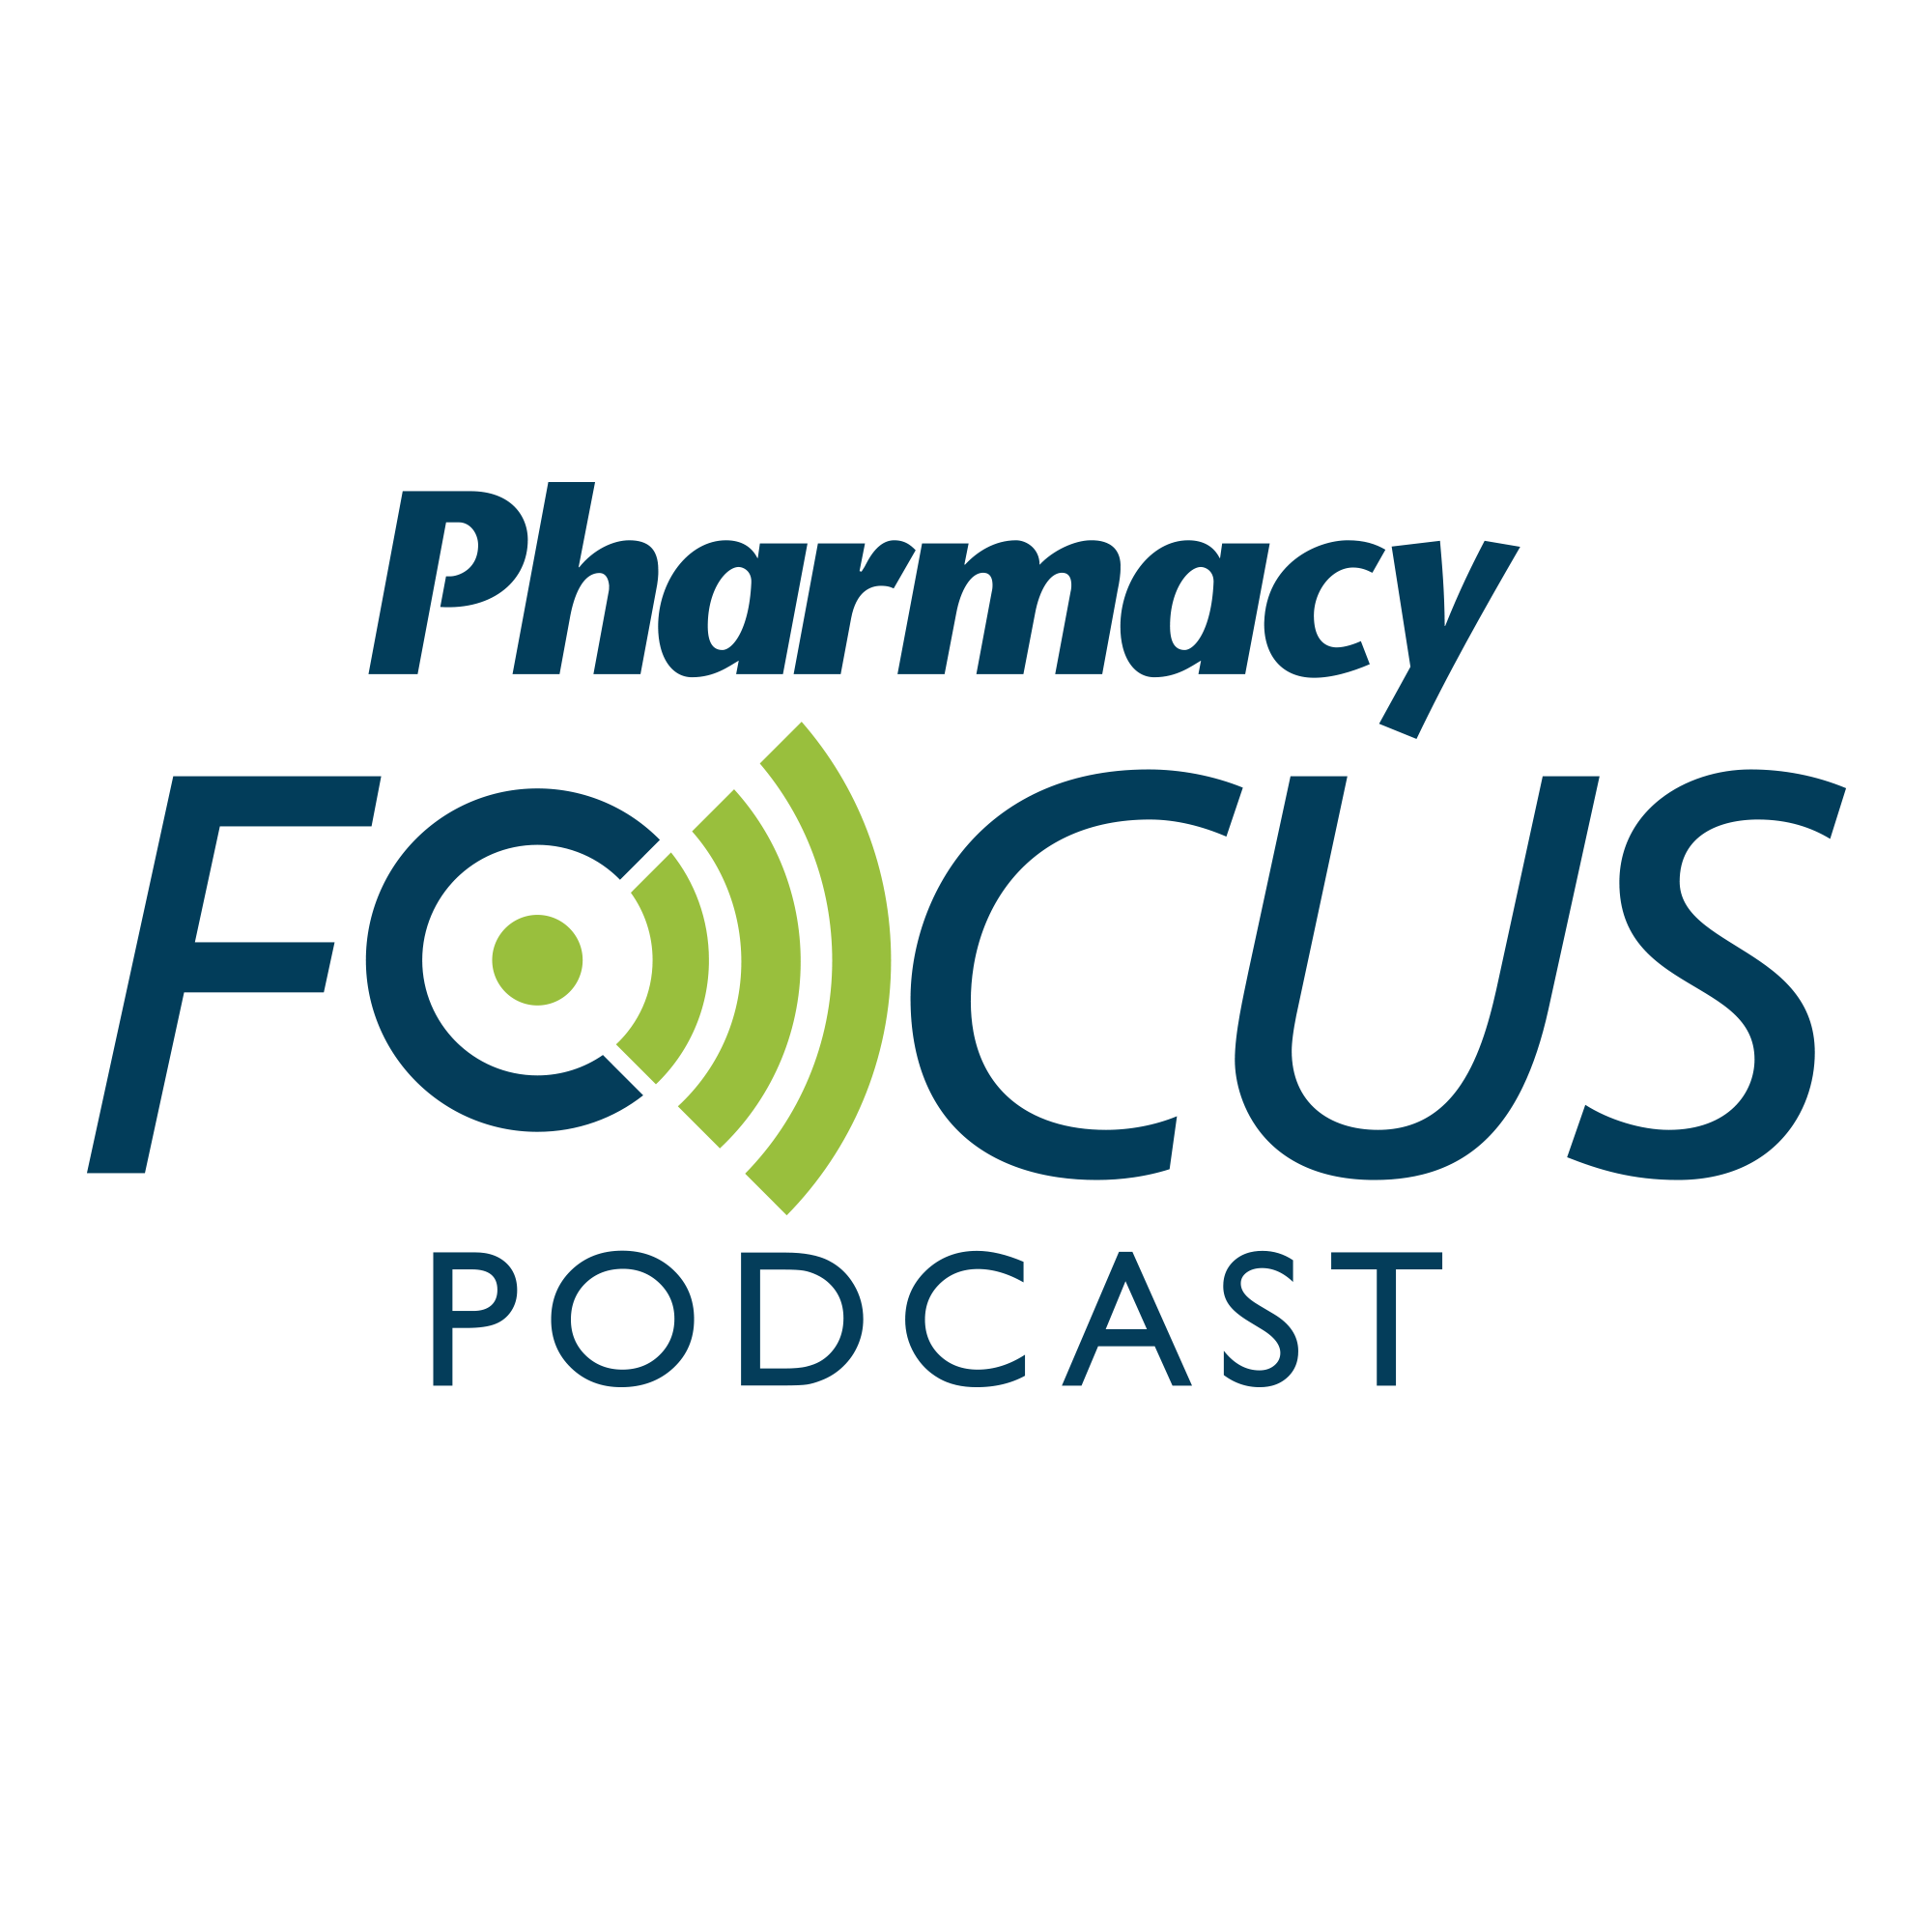 Focusing on Pharmacy: Discussing Reproductive Health